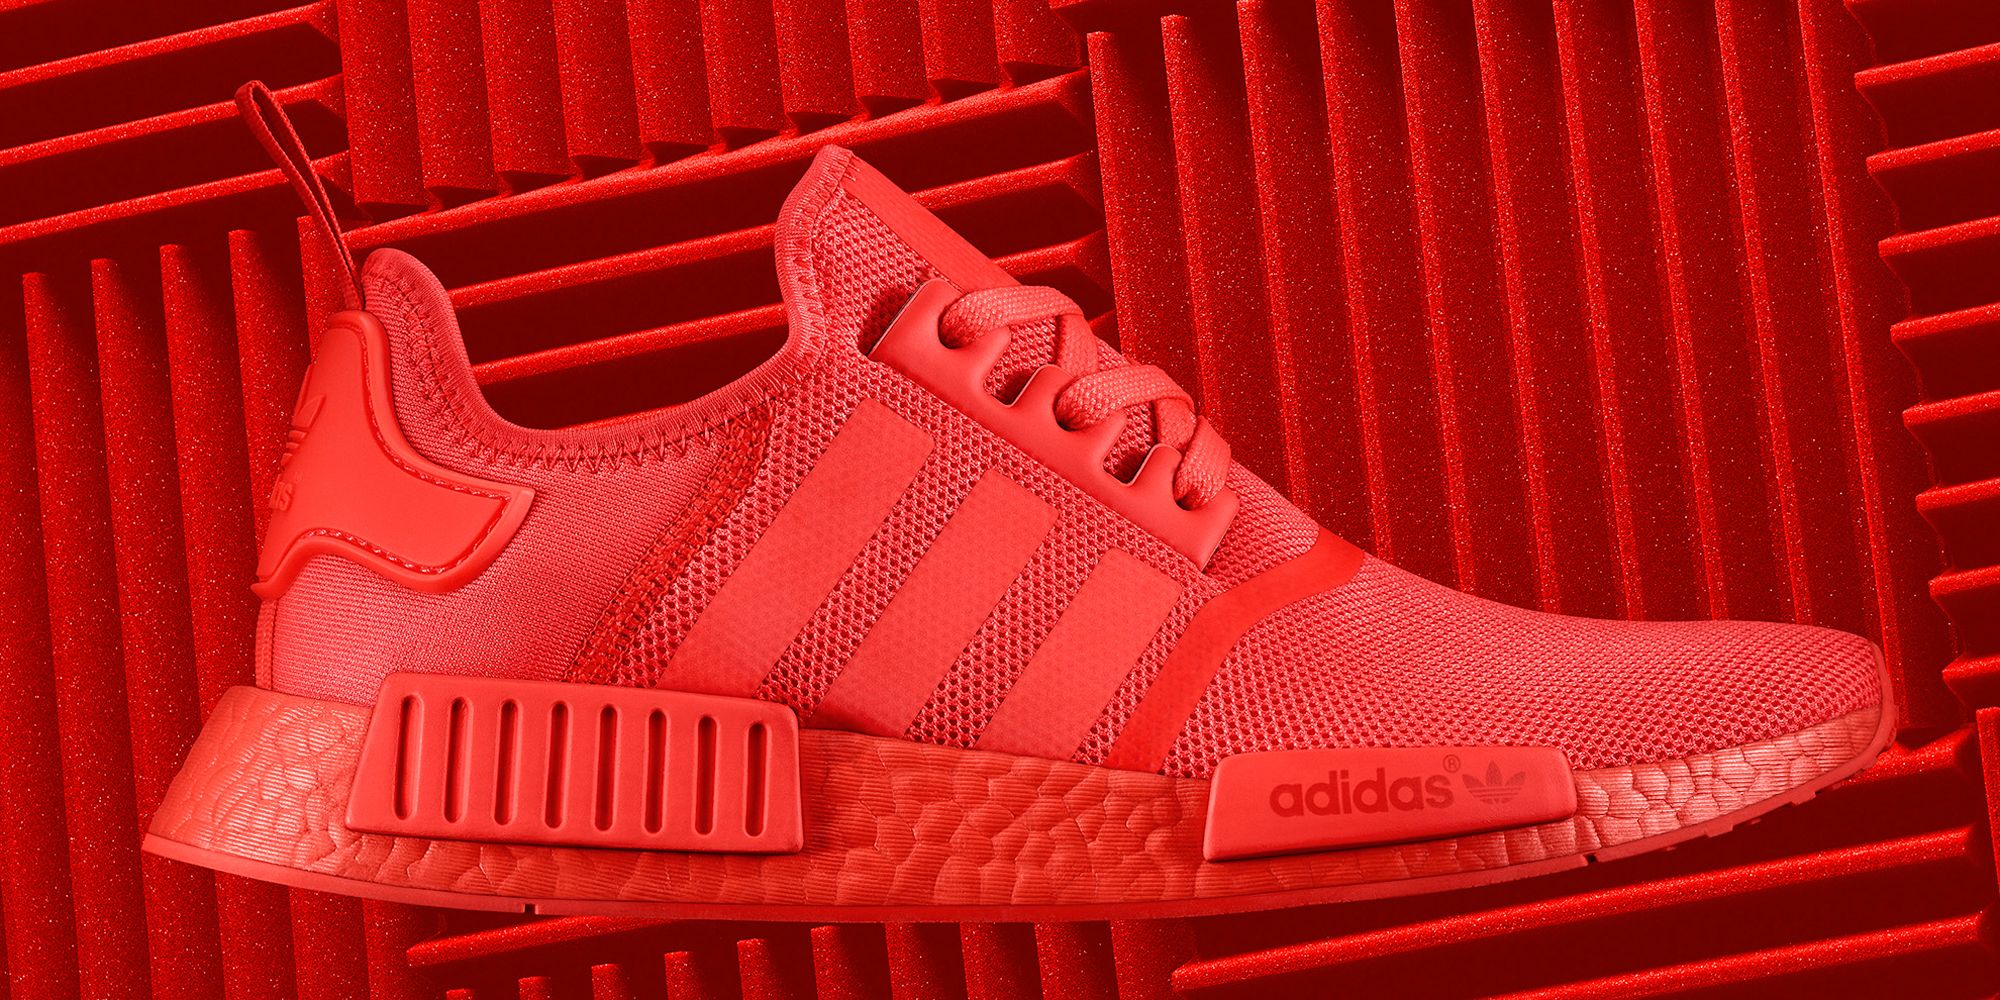 The New Adidas NMDs Are More Than Just a Pair of Red Sneakers